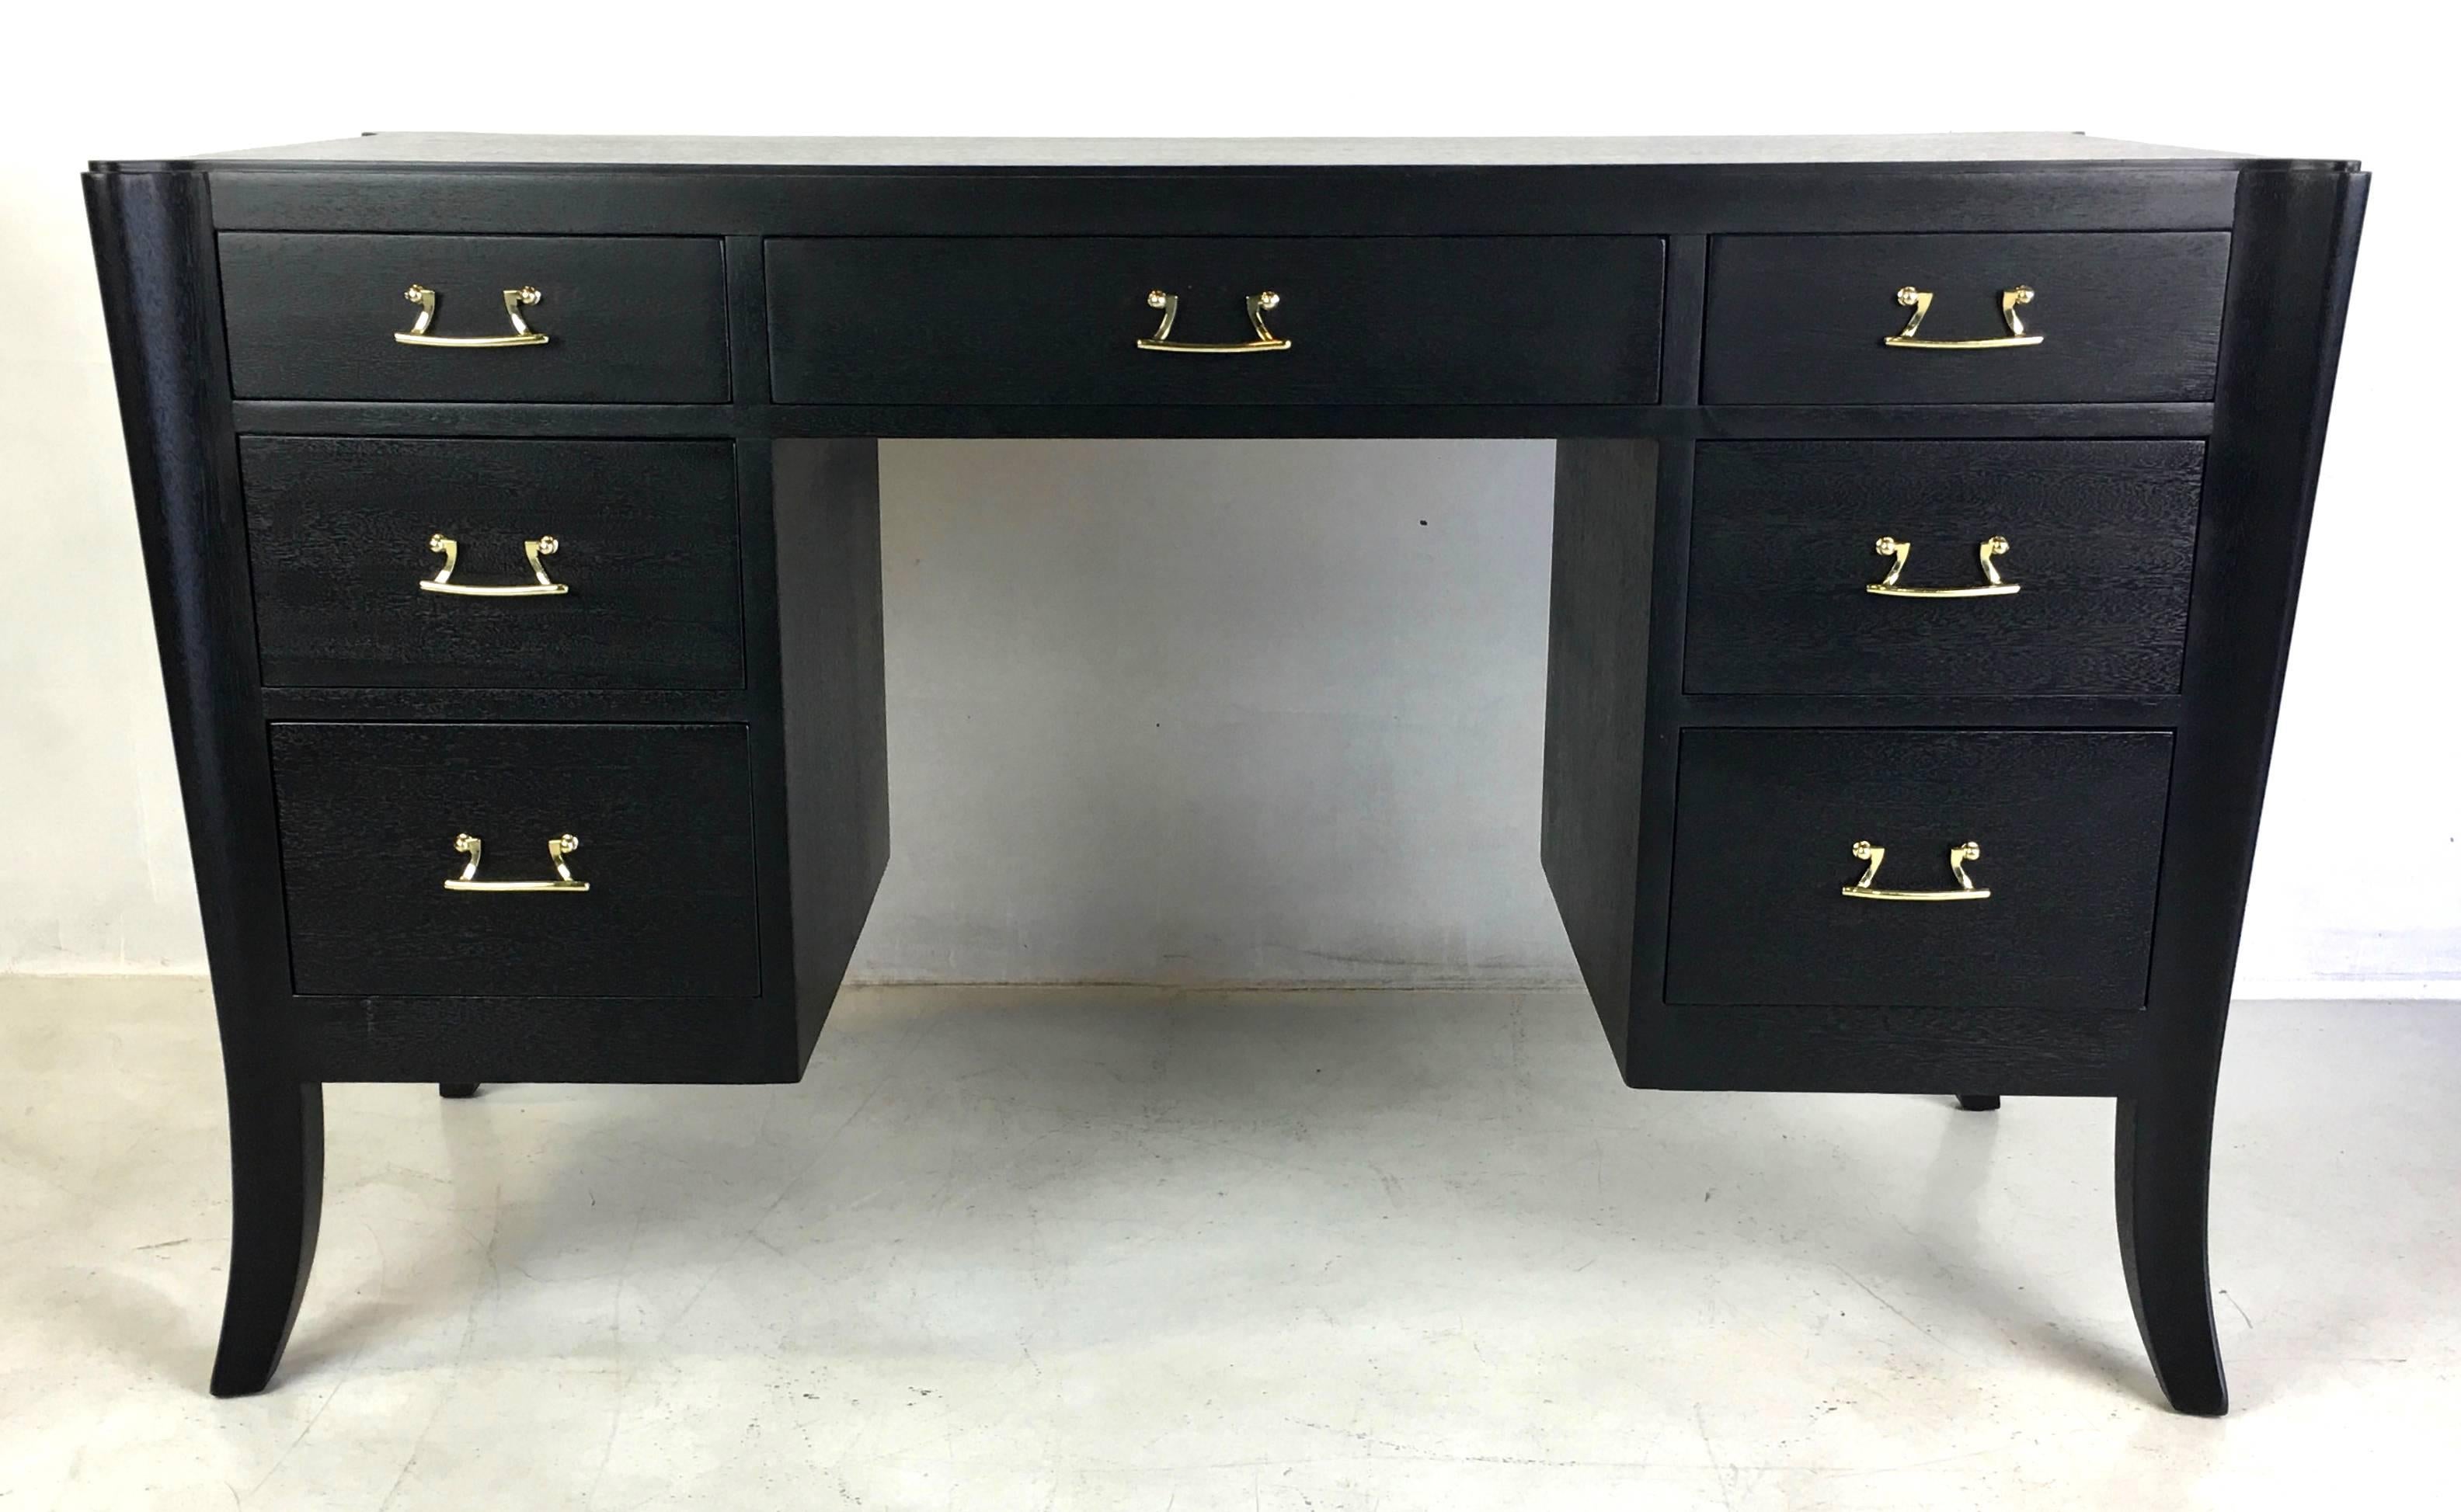 Very rare and early modernist ebonized mahogany desk with sculpted saber legs and stylized bail pulls by Paul T. Frankl for Brown-Saltman. The desk has been completely restored and refinished and the solid brass hardware has been freshly polished